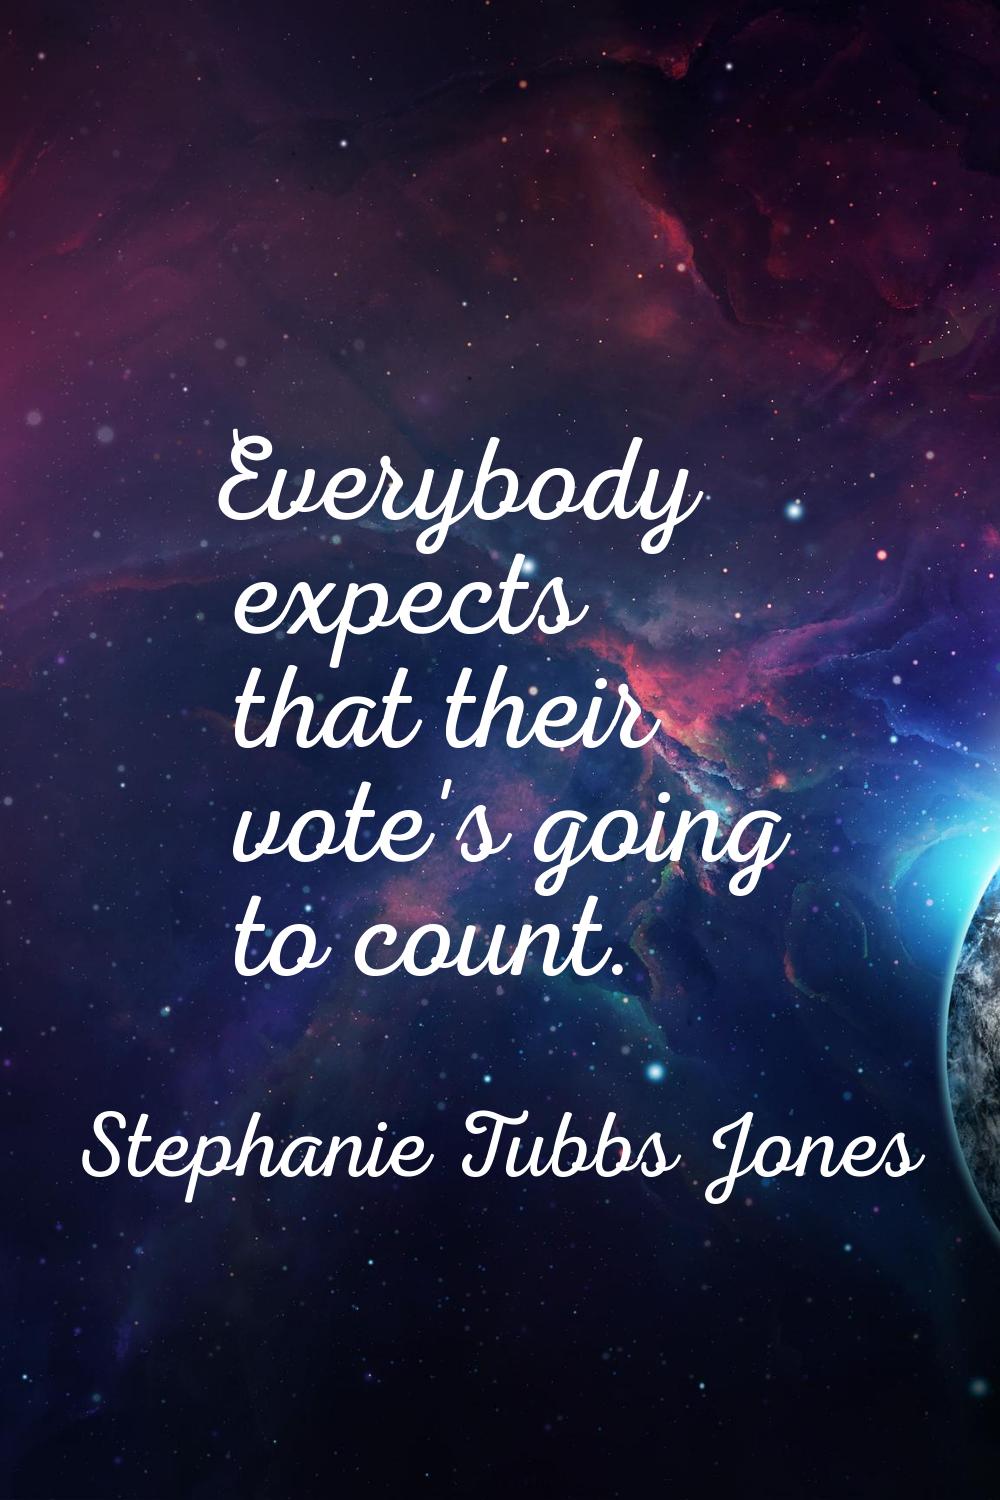 Everybody expects that their vote's going to count.